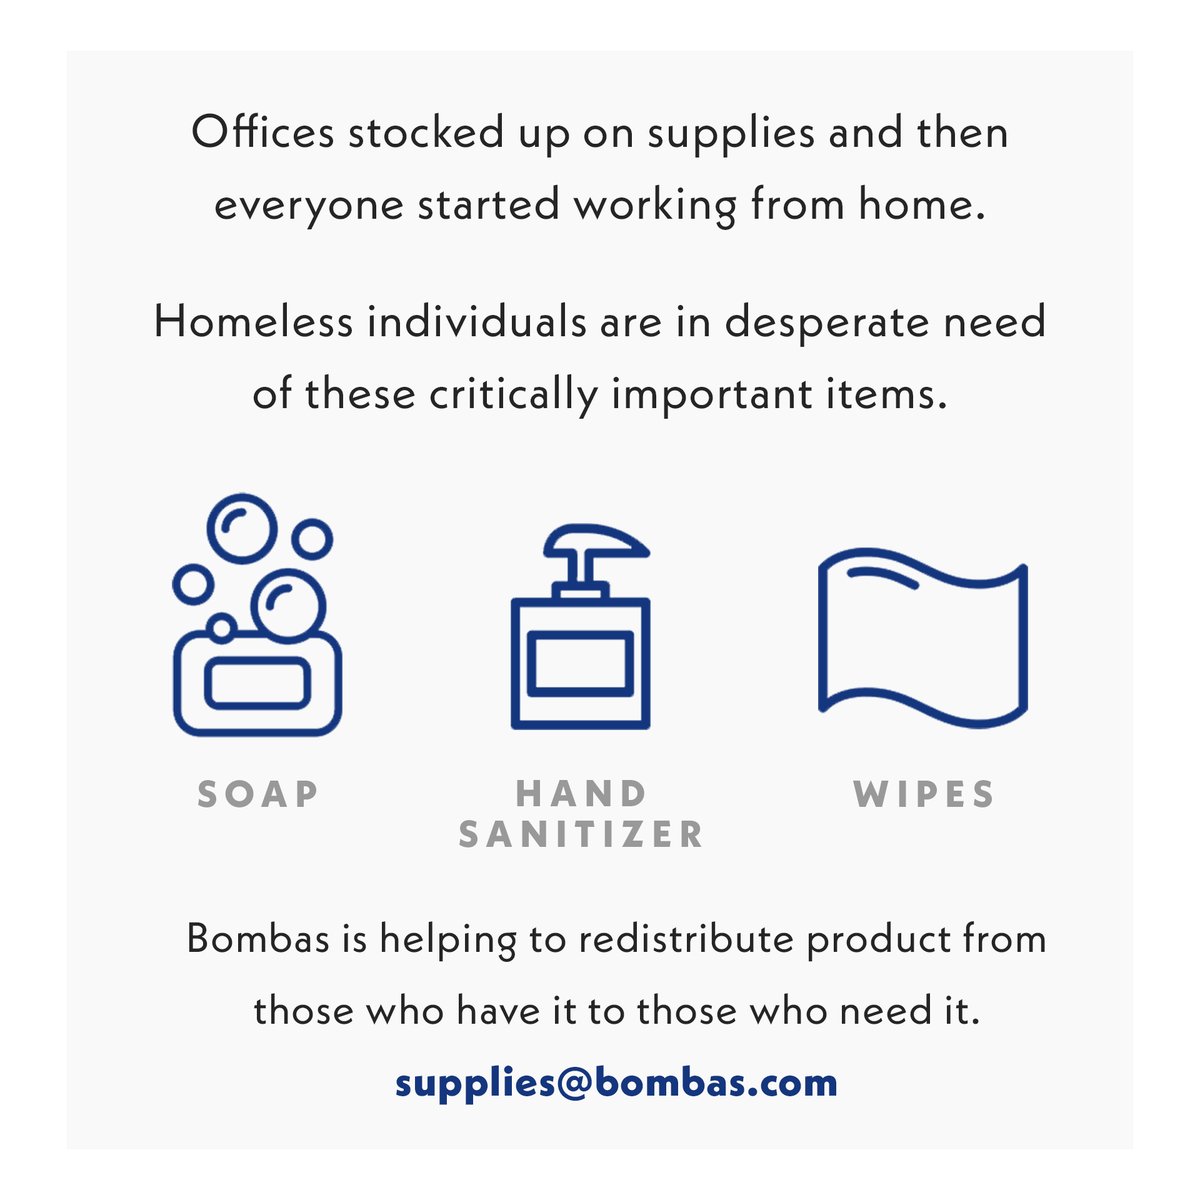  @Bombas, founded by  @babsonalumni Eric Medsker David '05 and Andrew Heath MBA'12, is helping to redistribute new, unused product from those who have it to those who need it. Have access to excess? Email supplies@bombas.com for help getting it moved.